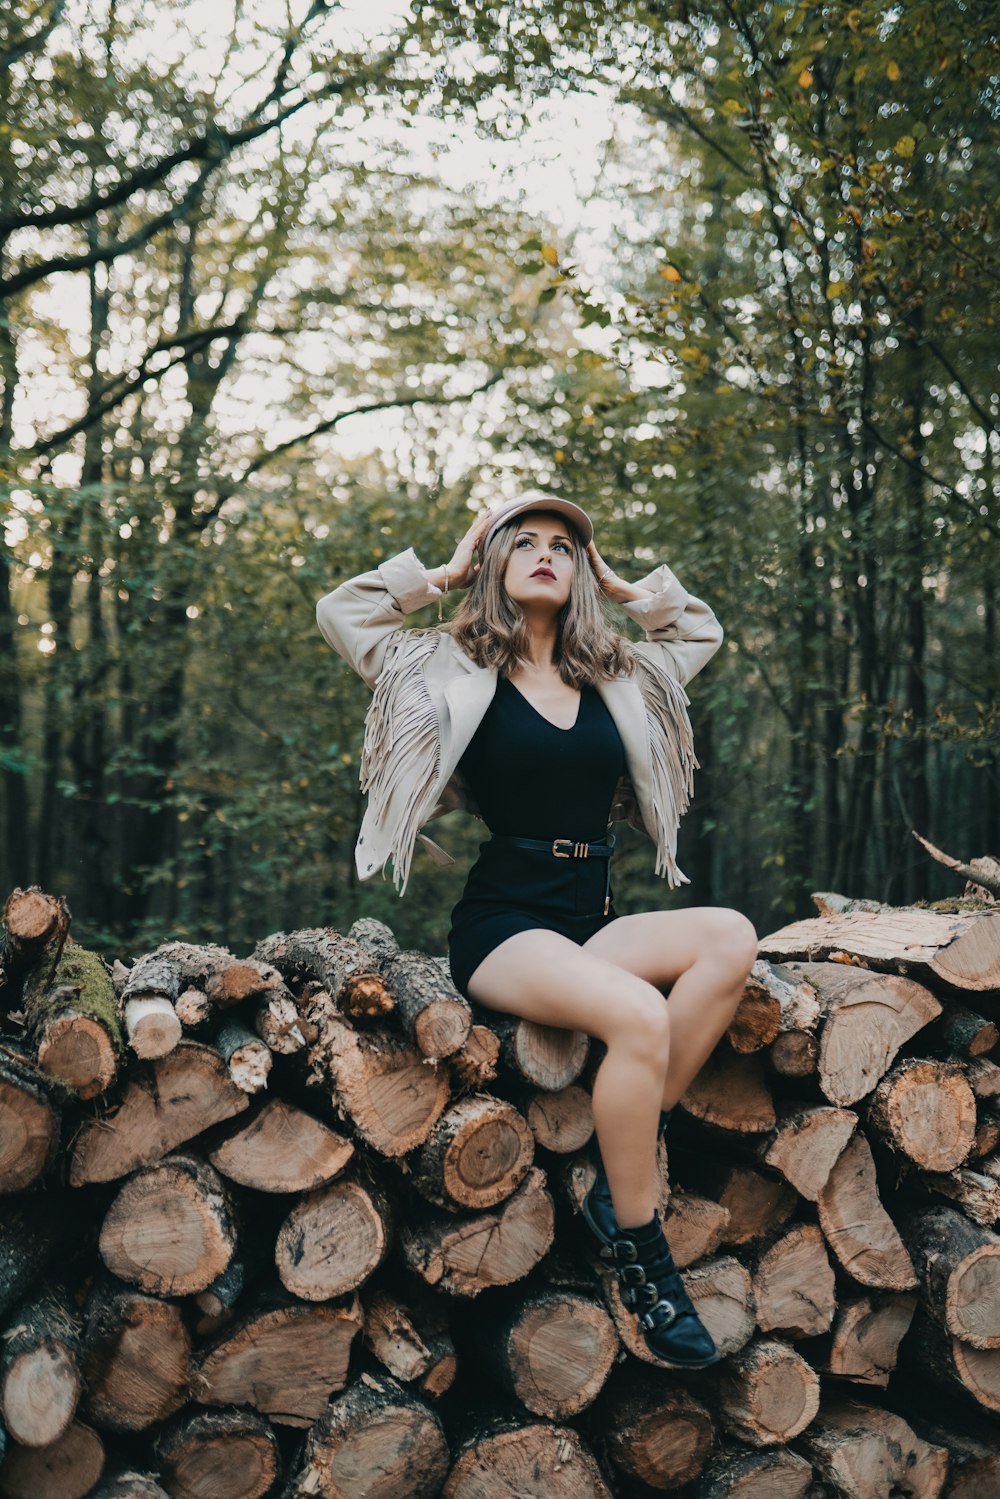 woman sitting on firewood stack looking up while touching her hat surrounded with green trees